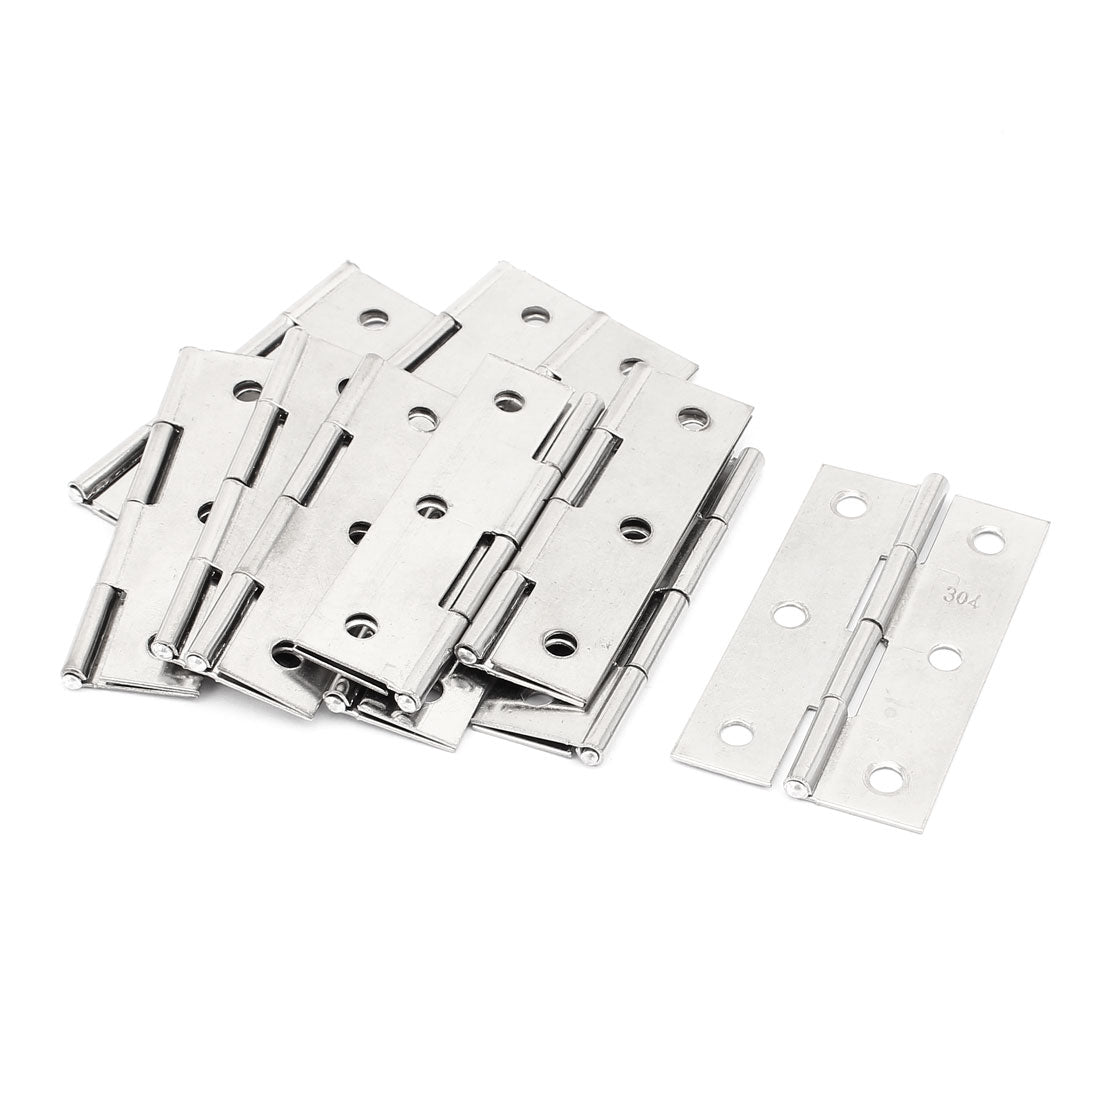 uxcell Uxcell 11 Pcs Stainless Steel 4.5mm Mounting Hole 2.6" Length Cabinet Door Hinge